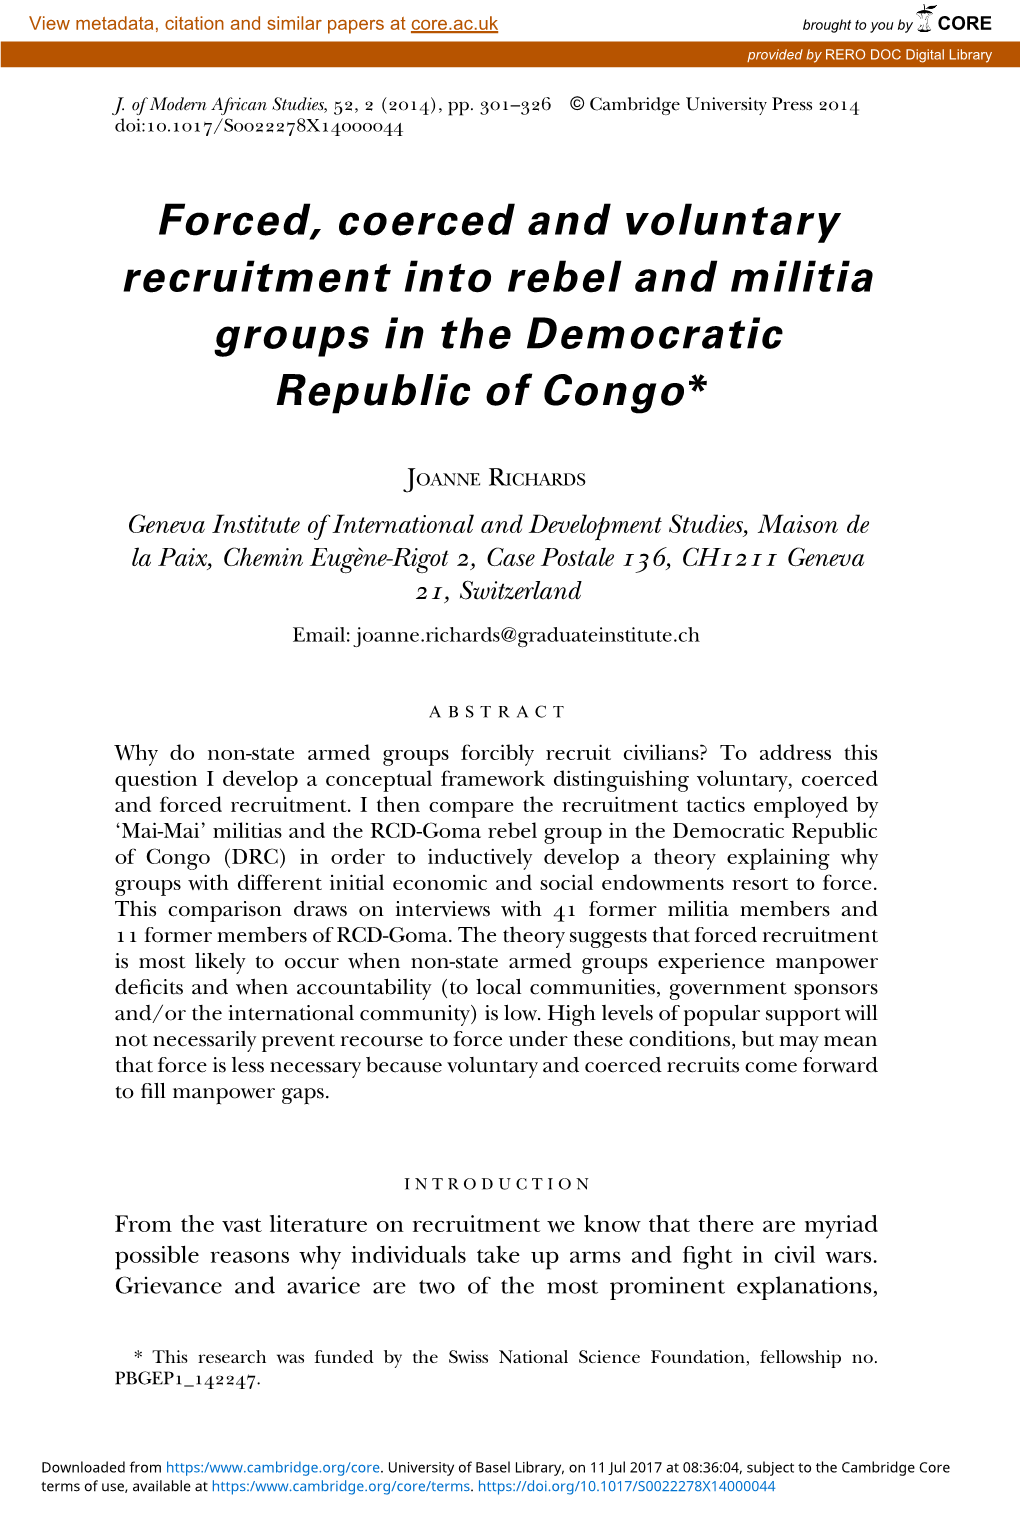 Forced, Coerced and Voluntary Recruitment Into Rebel and Militia Groups in the Democratic Republic of Congo*